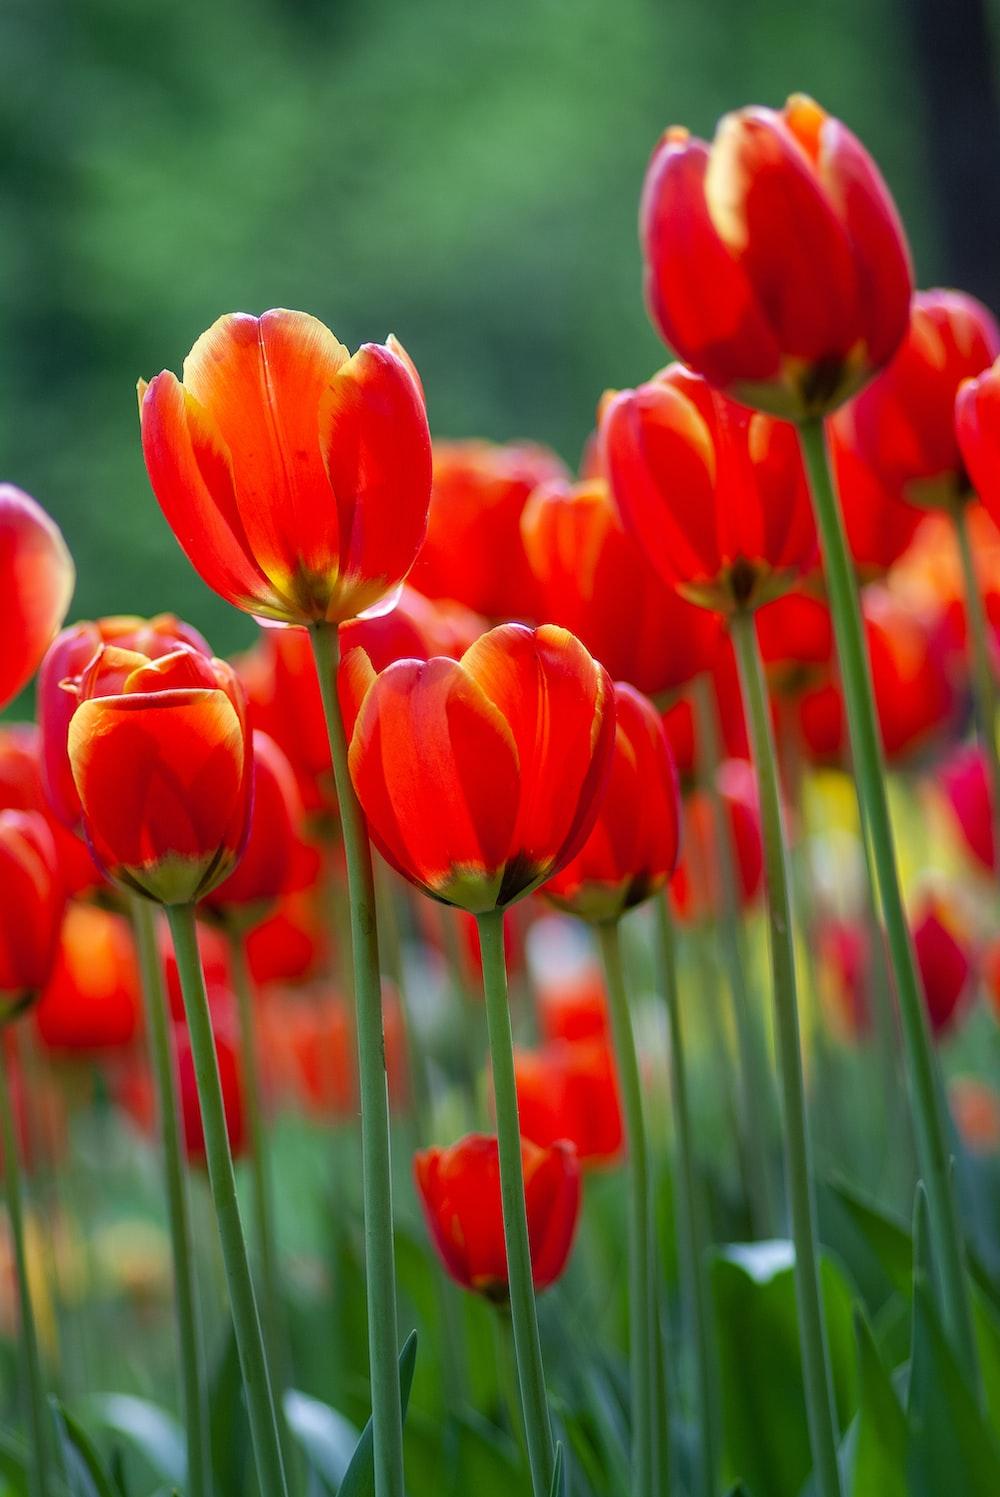 Red Tulip Flower Photo Spring Plants Image